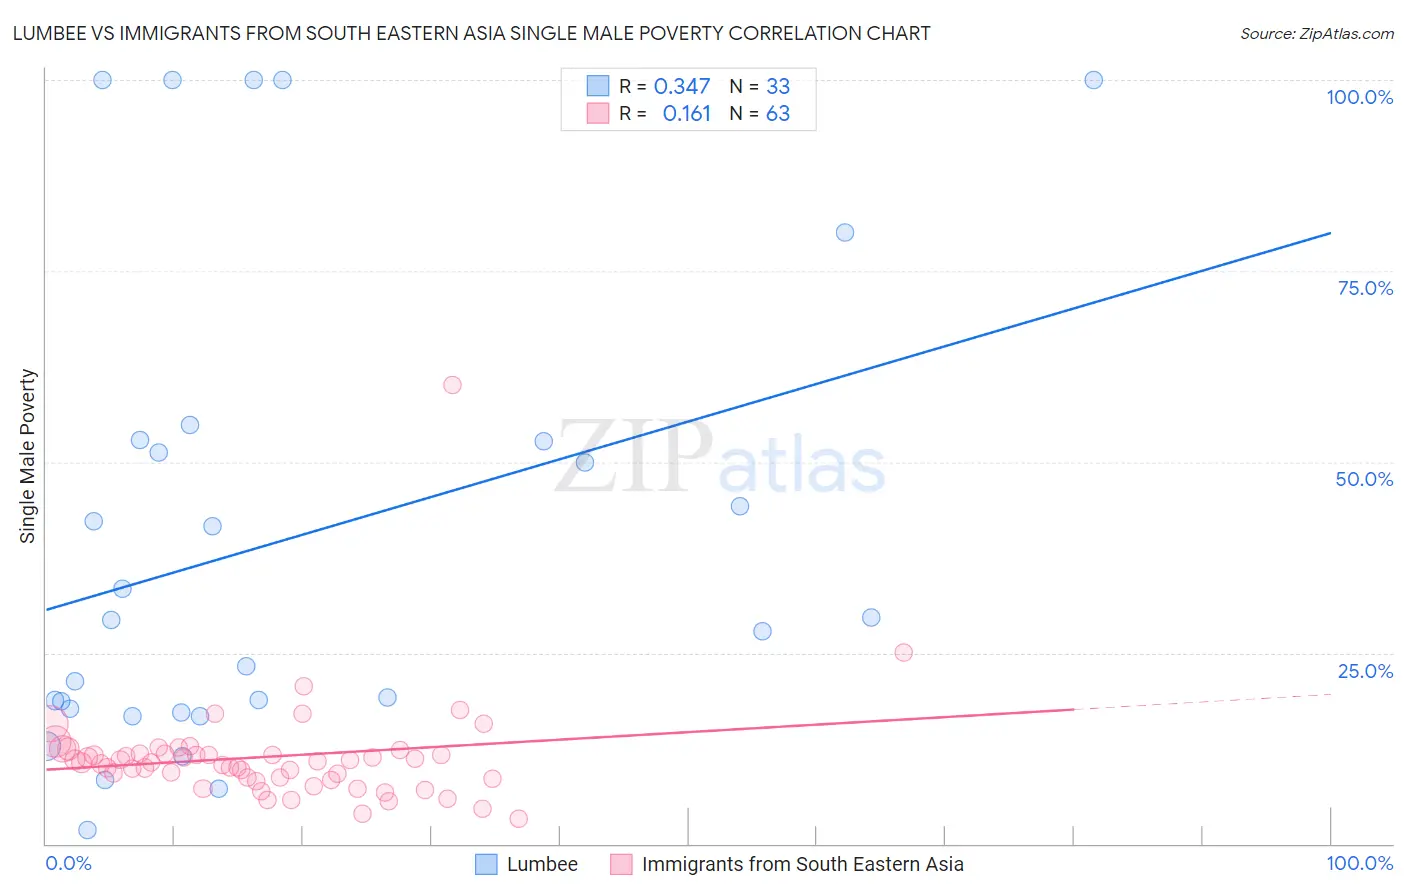 Lumbee vs Immigrants from South Eastern Asia Single Male Poverty